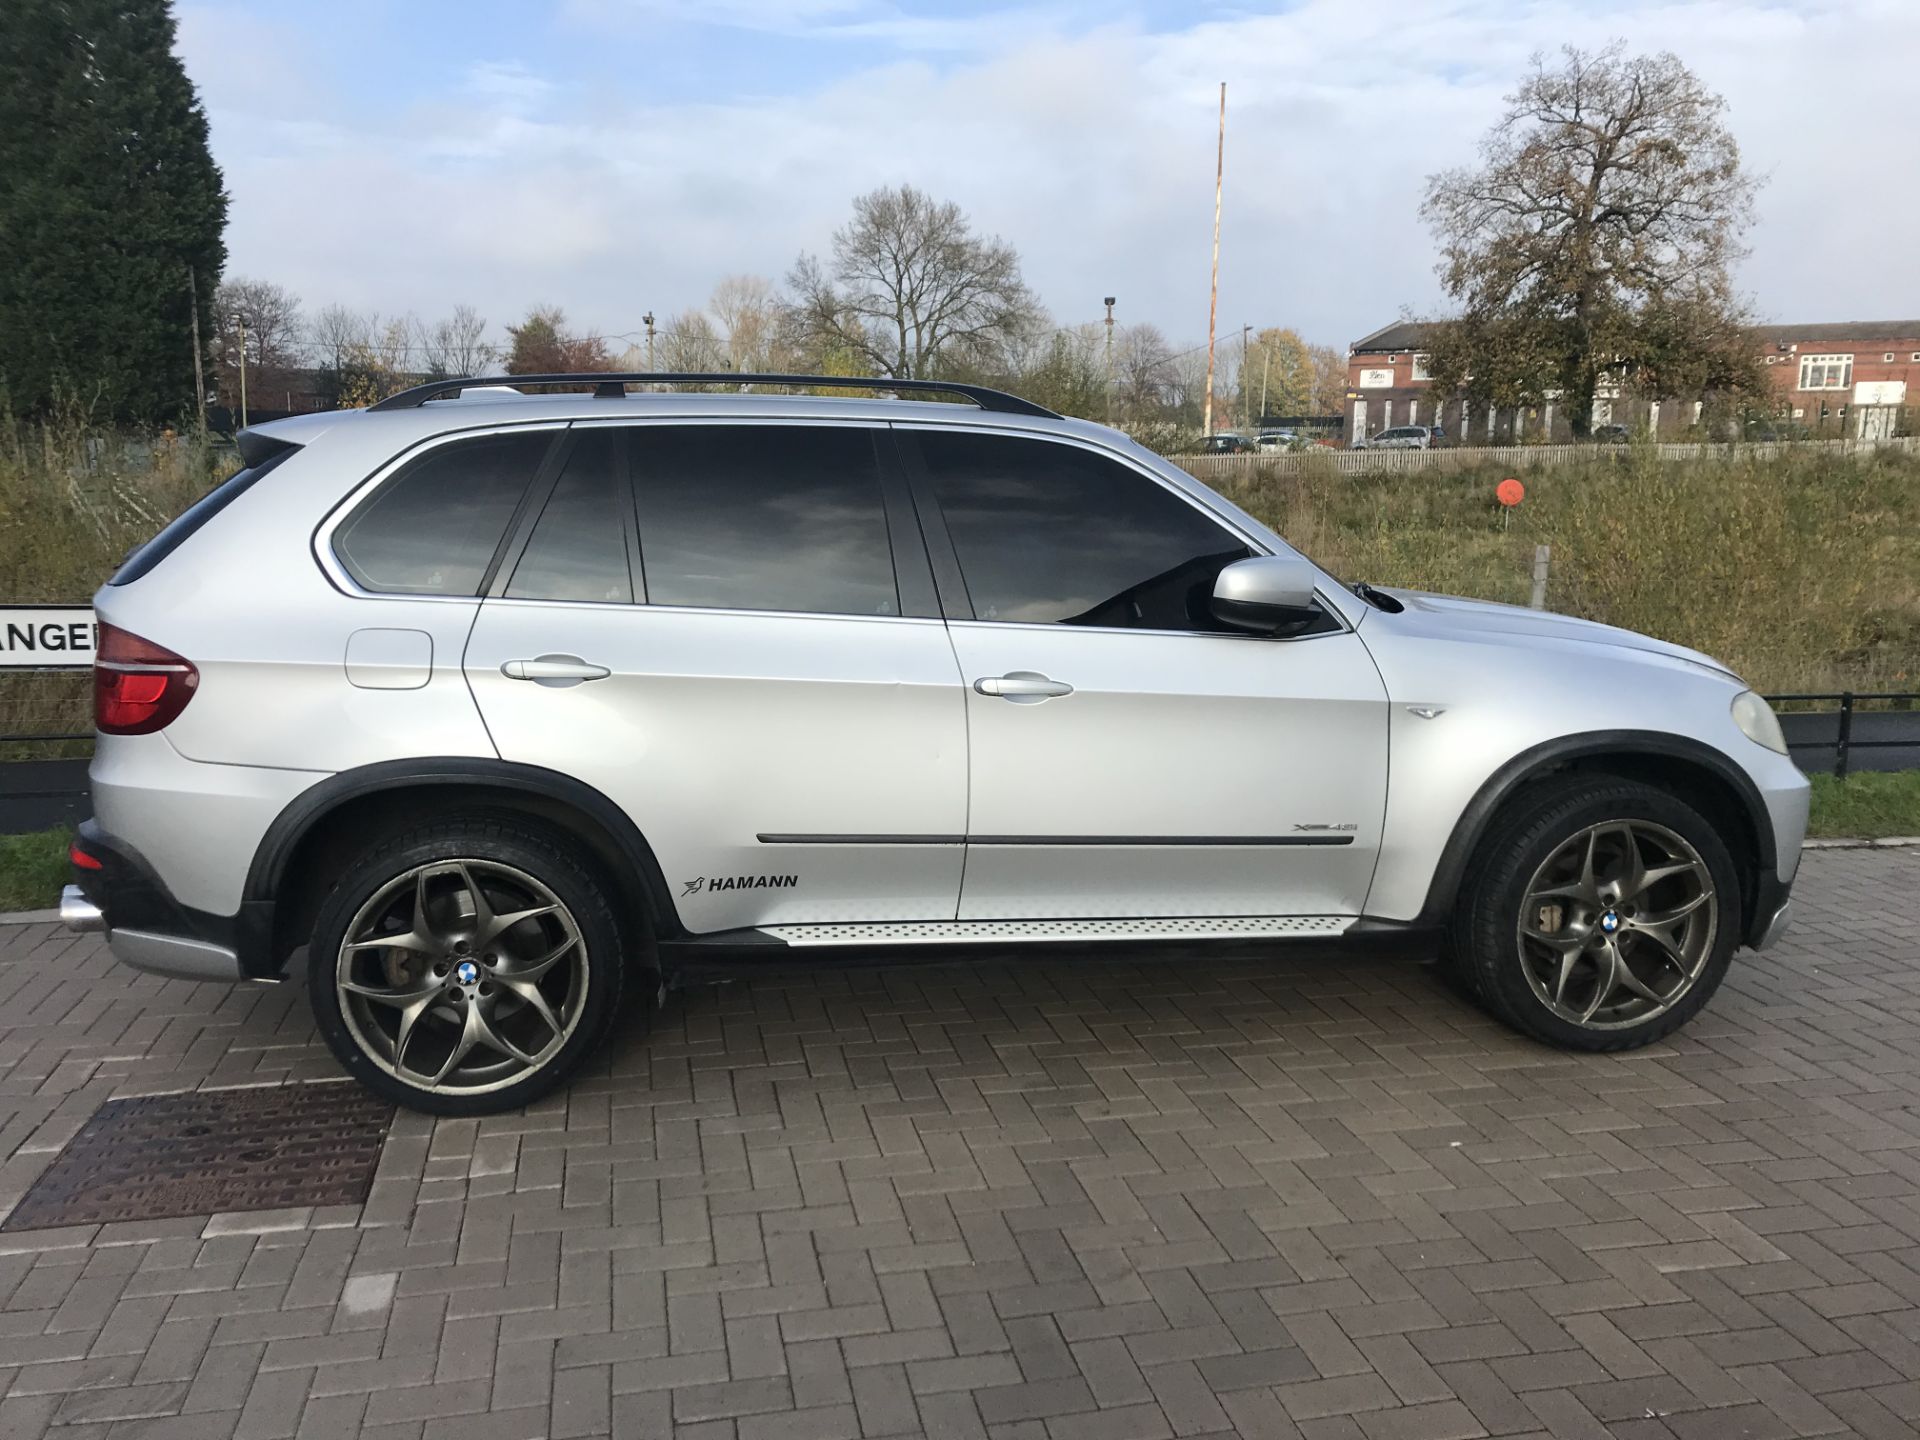 2009 REG BMW X5 4.8L PETROL AUTOMATIC SILVER,SHOWING 1 FORMER KEEPER - left hand drive *NO VAT*